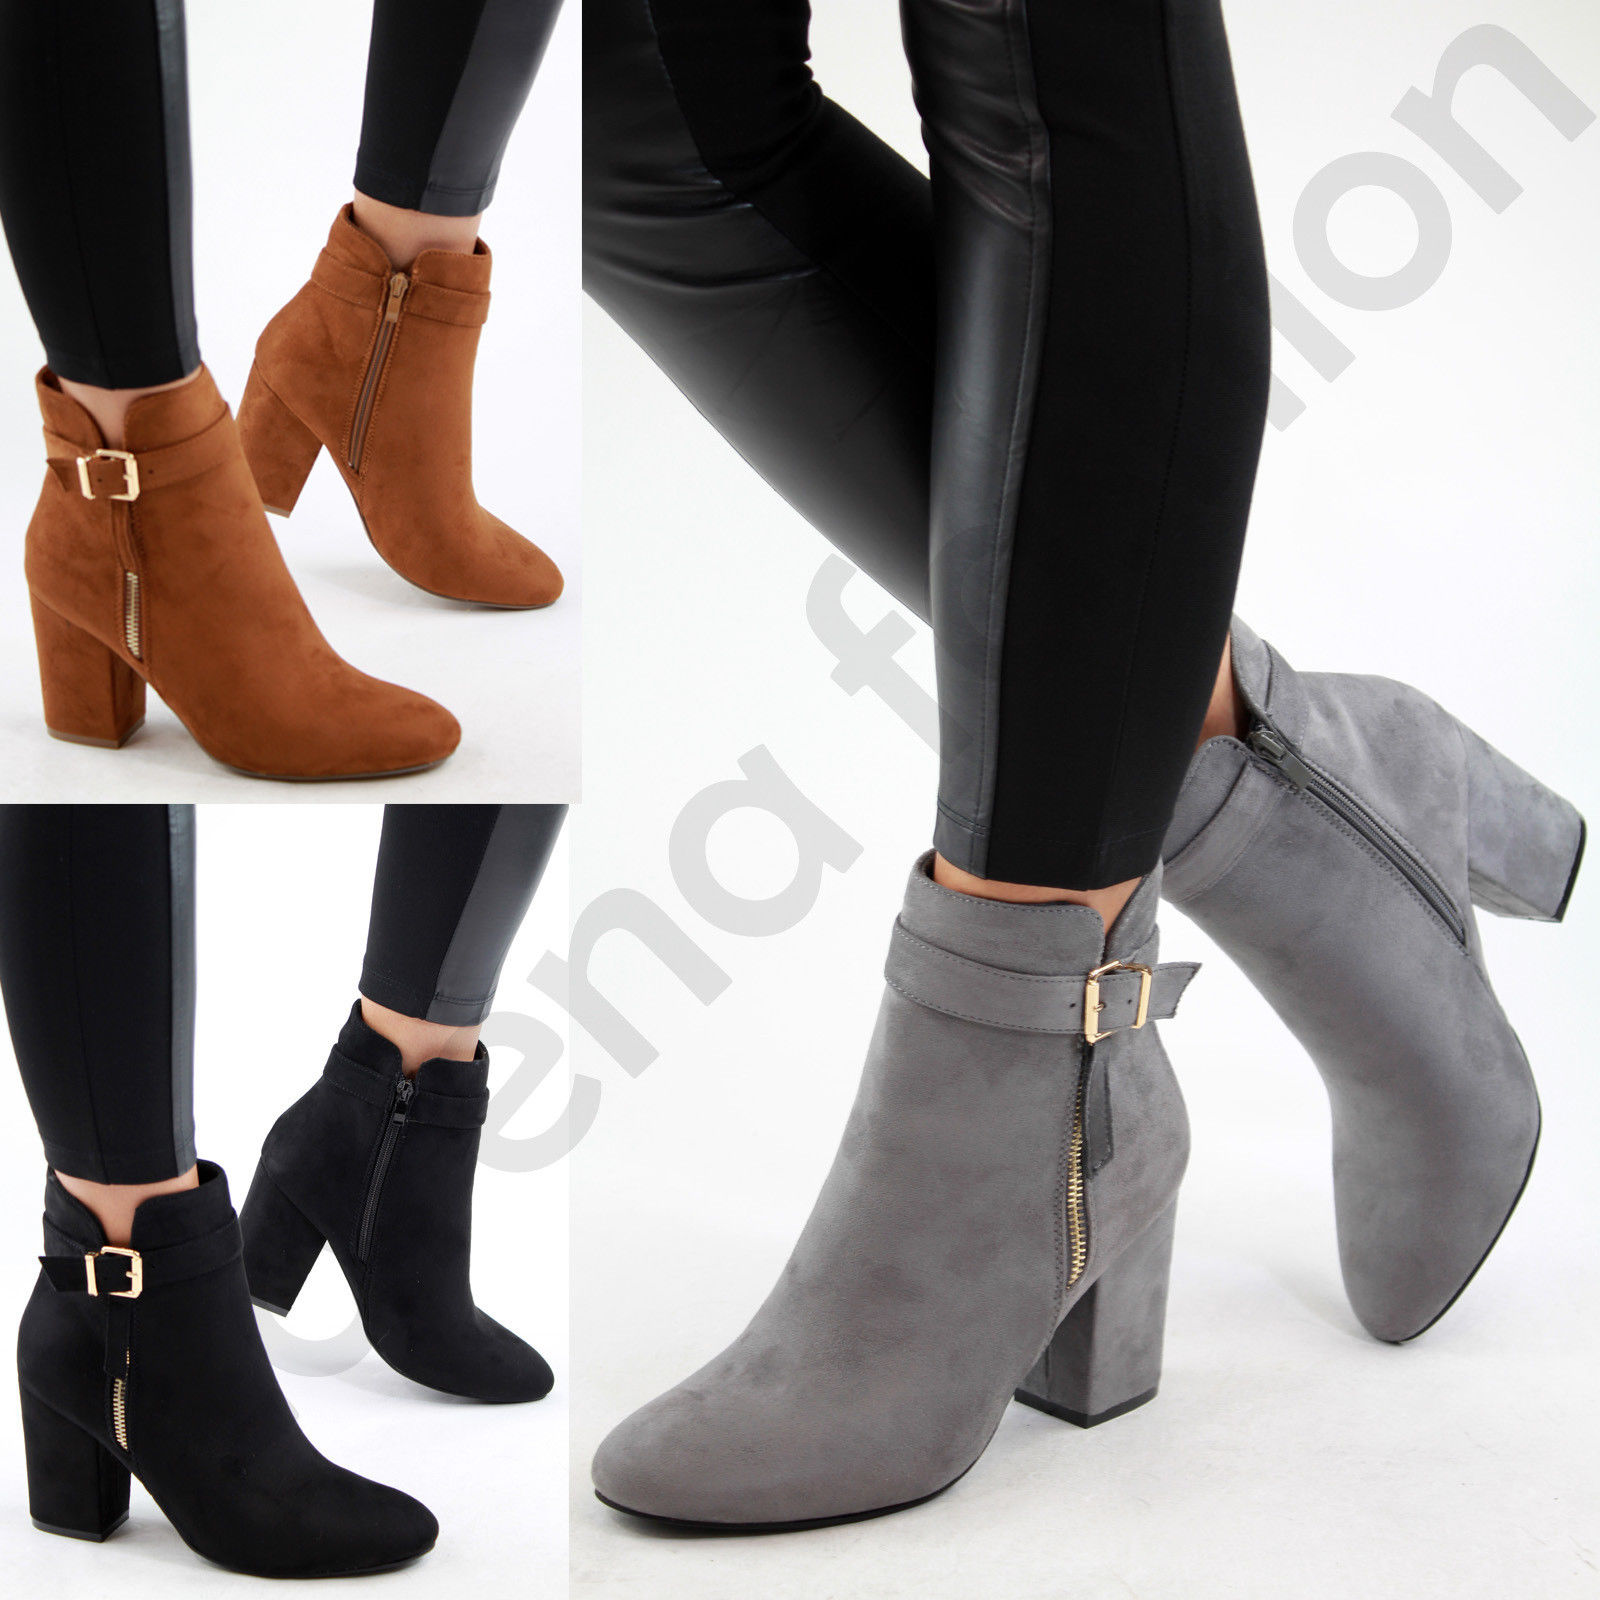 New Womens Ladies Ankle Boots High Block Heel Buckle Side Zip Casual Shoes Sizes